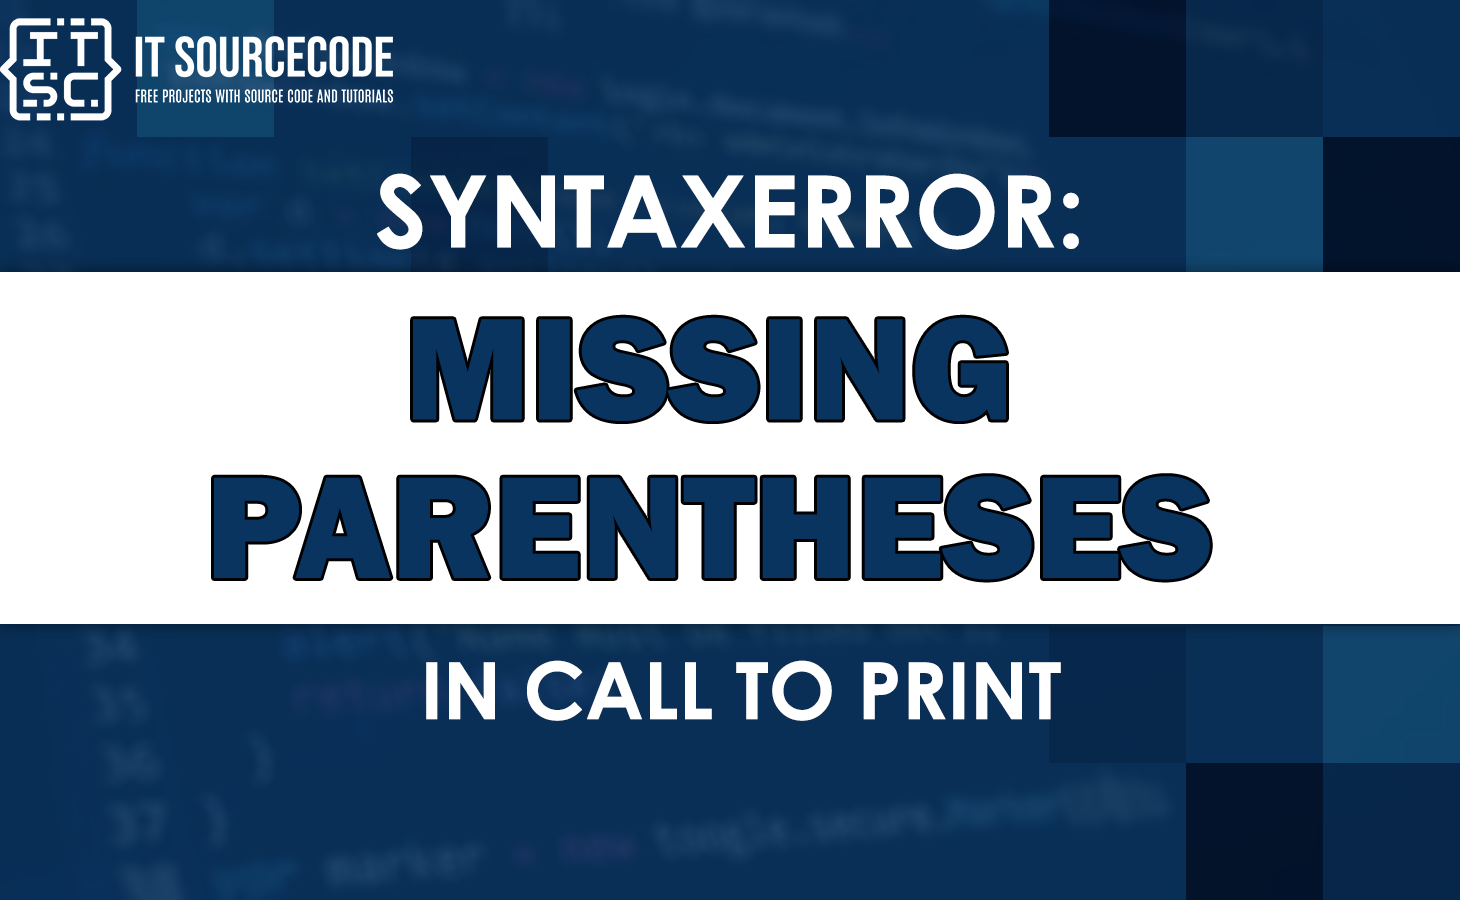 Syntaxerror missing parentheses in call to print